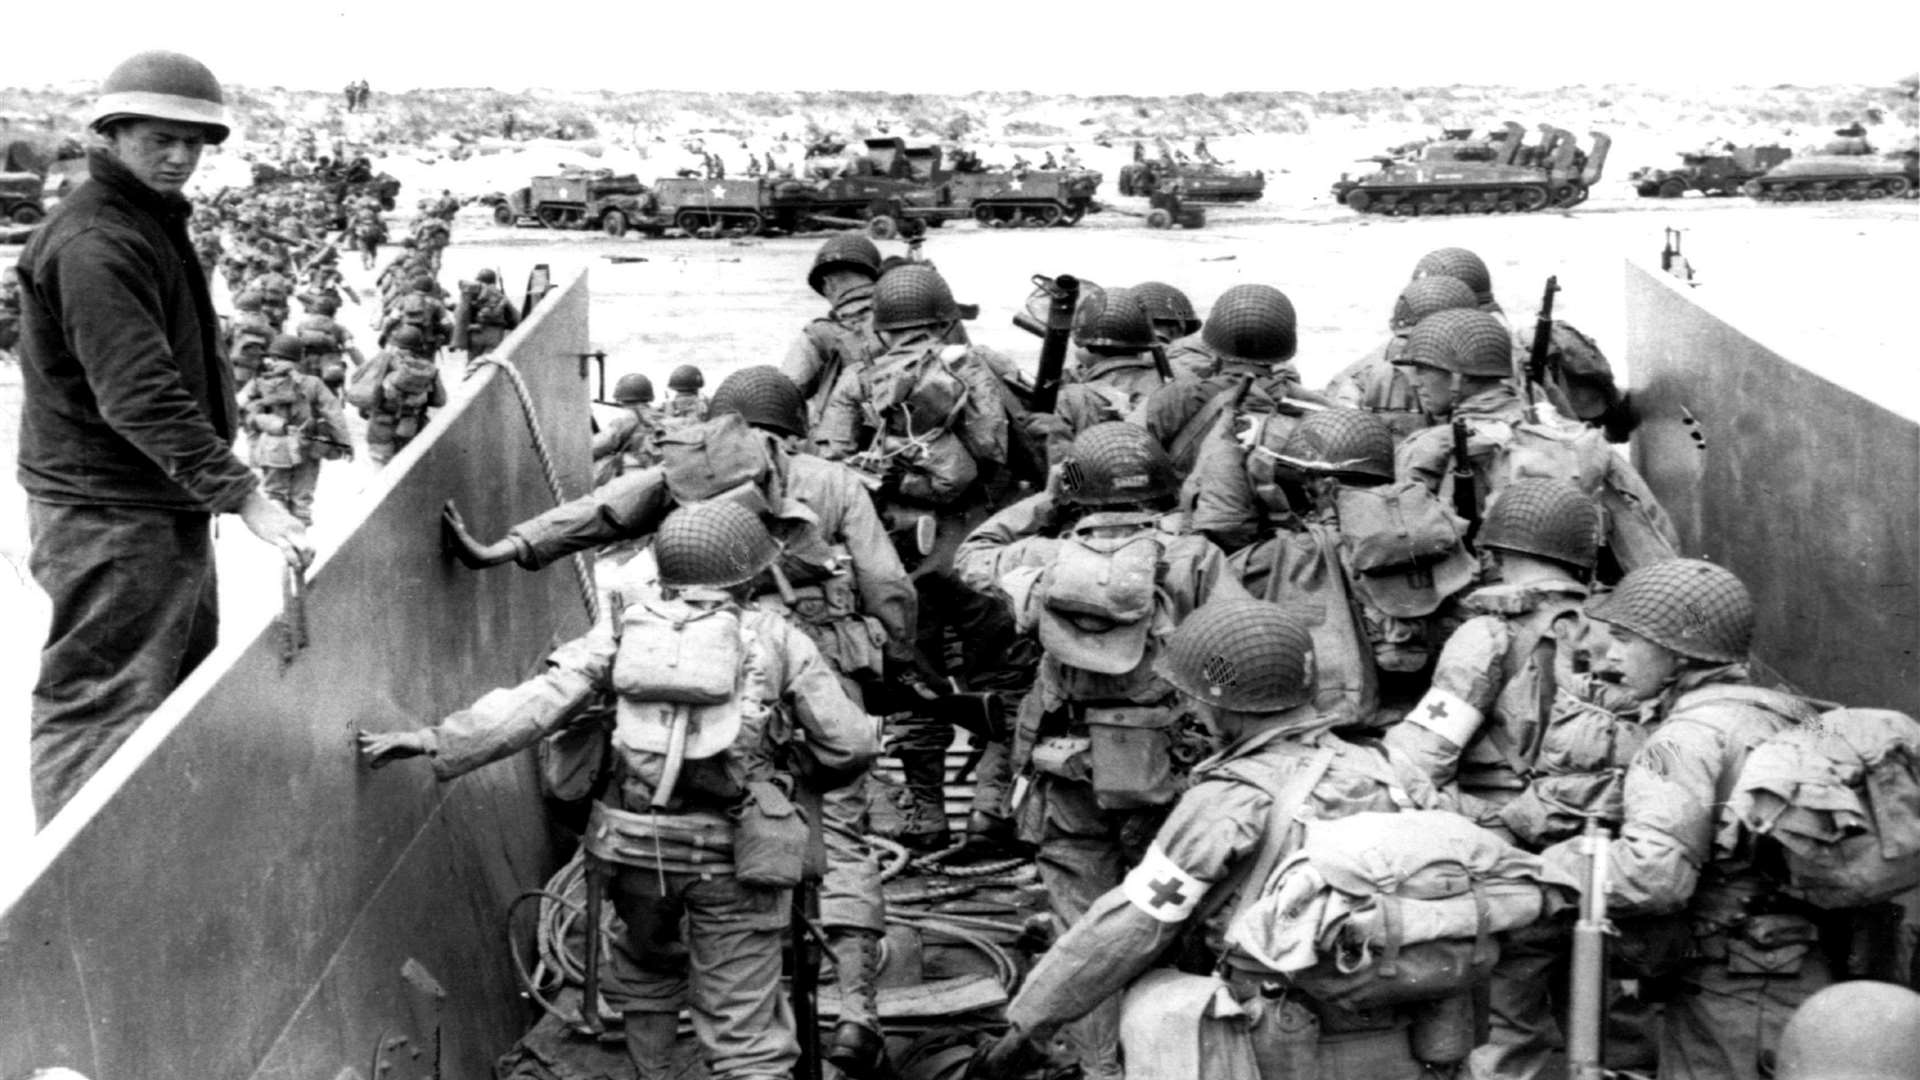 US Army soldiers disembark from a landing craft during the Normandy landings